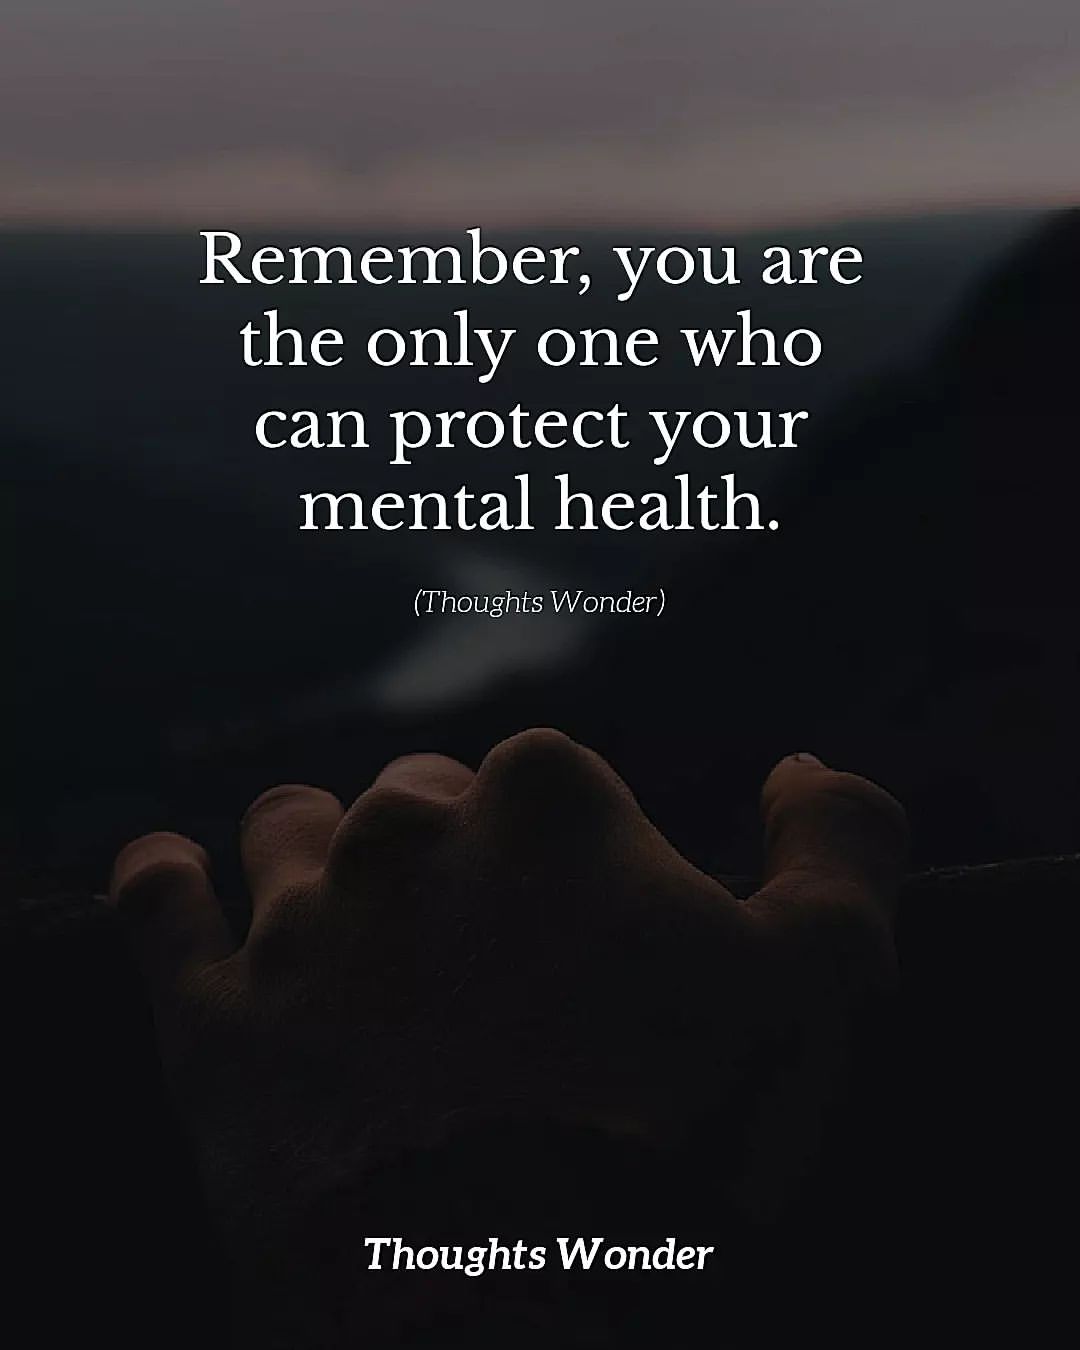 Remember, you are the only one who can protect your mental health.